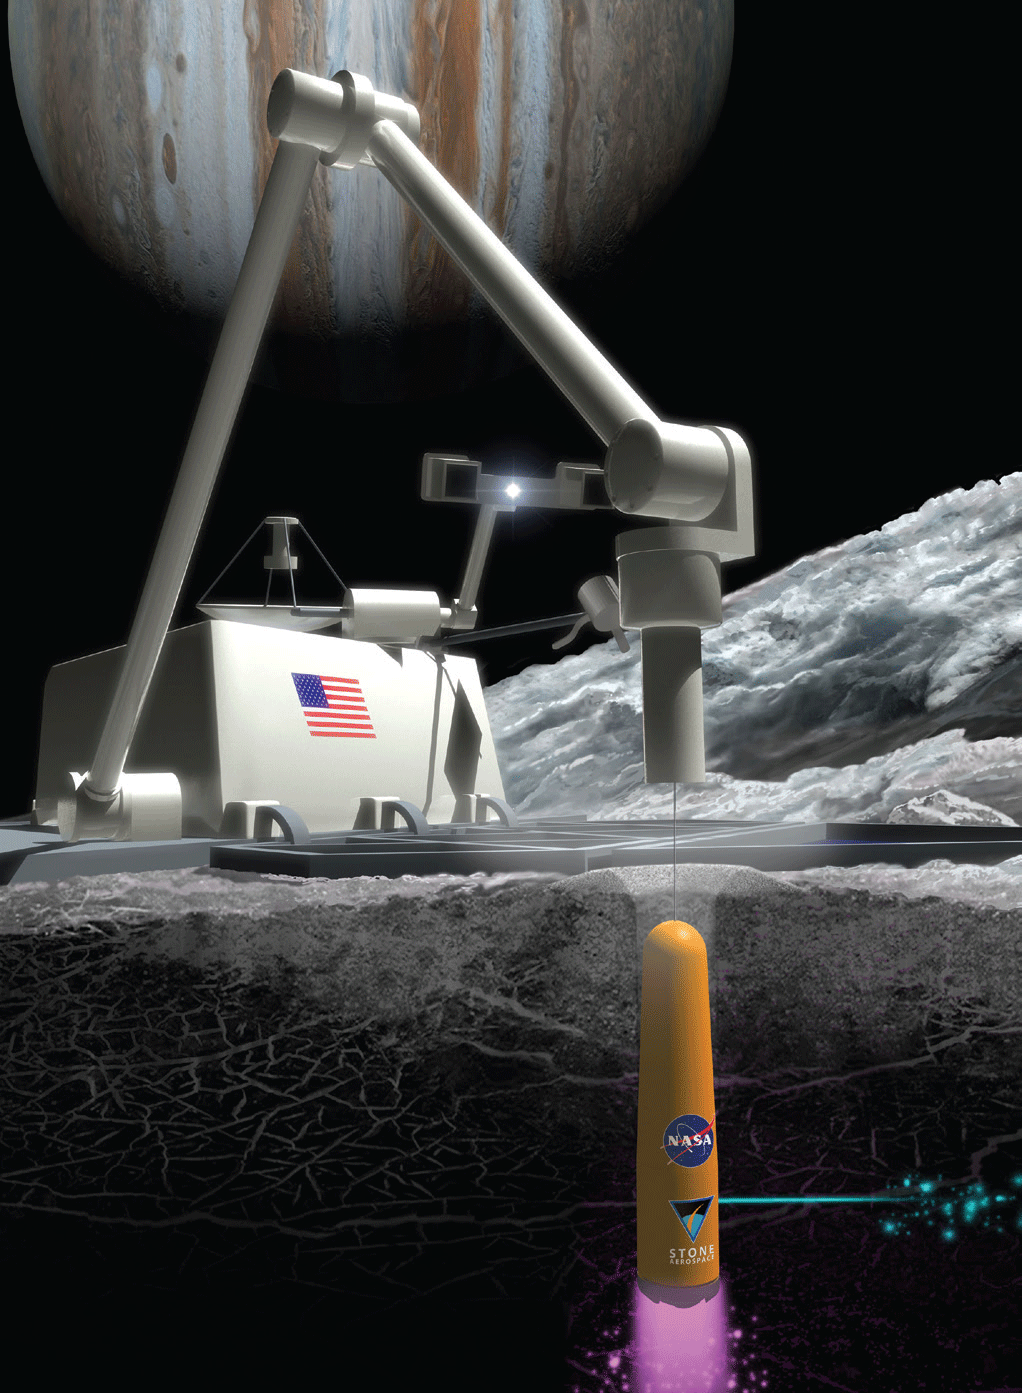 Conceptual design for ARCHIMEDES on Juptier's moon Europa